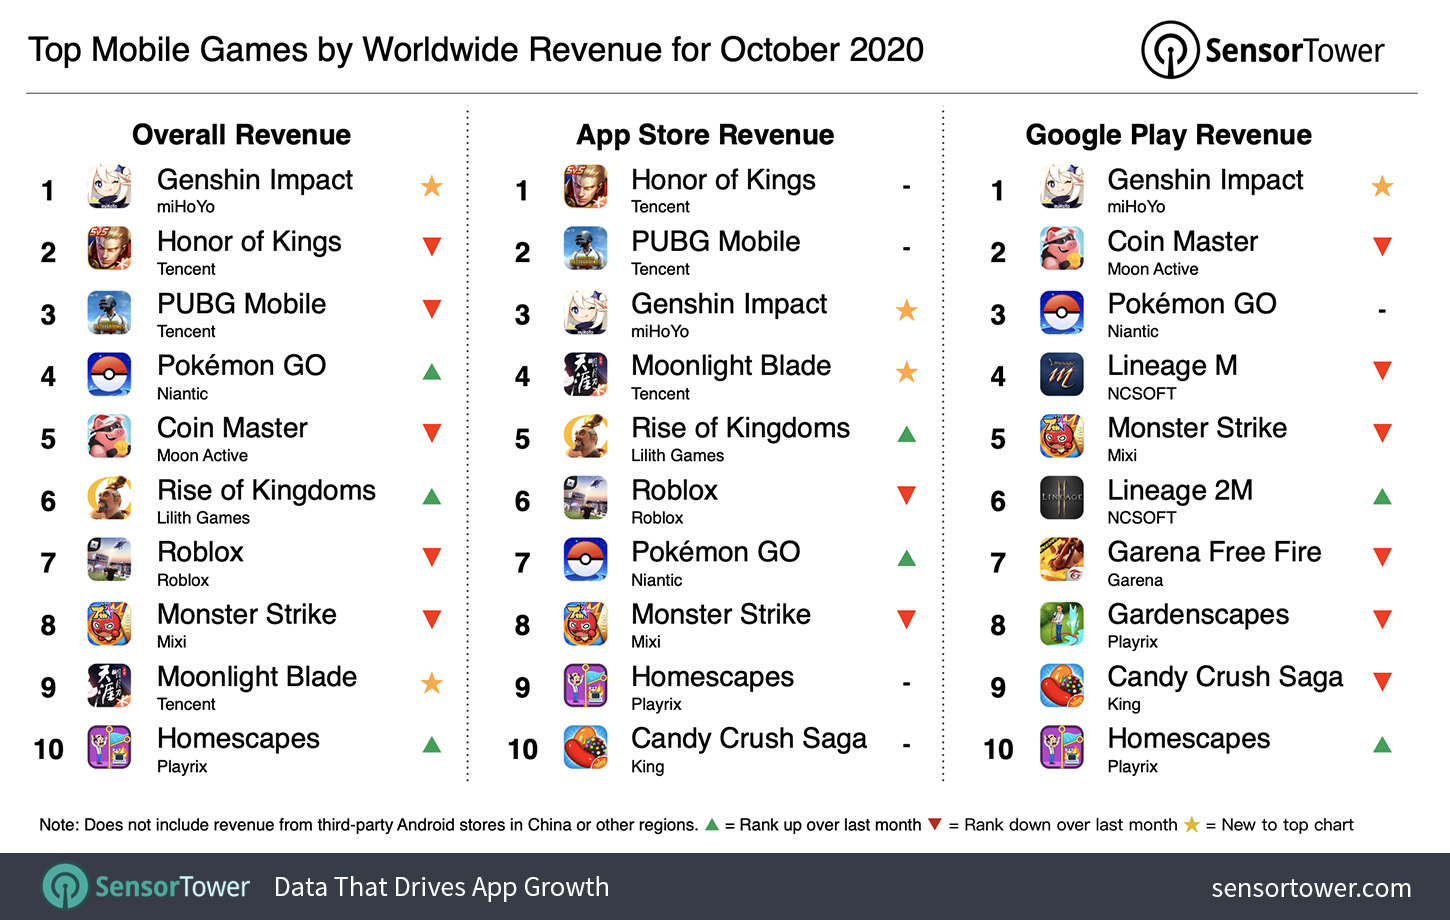 Top Grossing Mobile Games Worldwide for October 2020